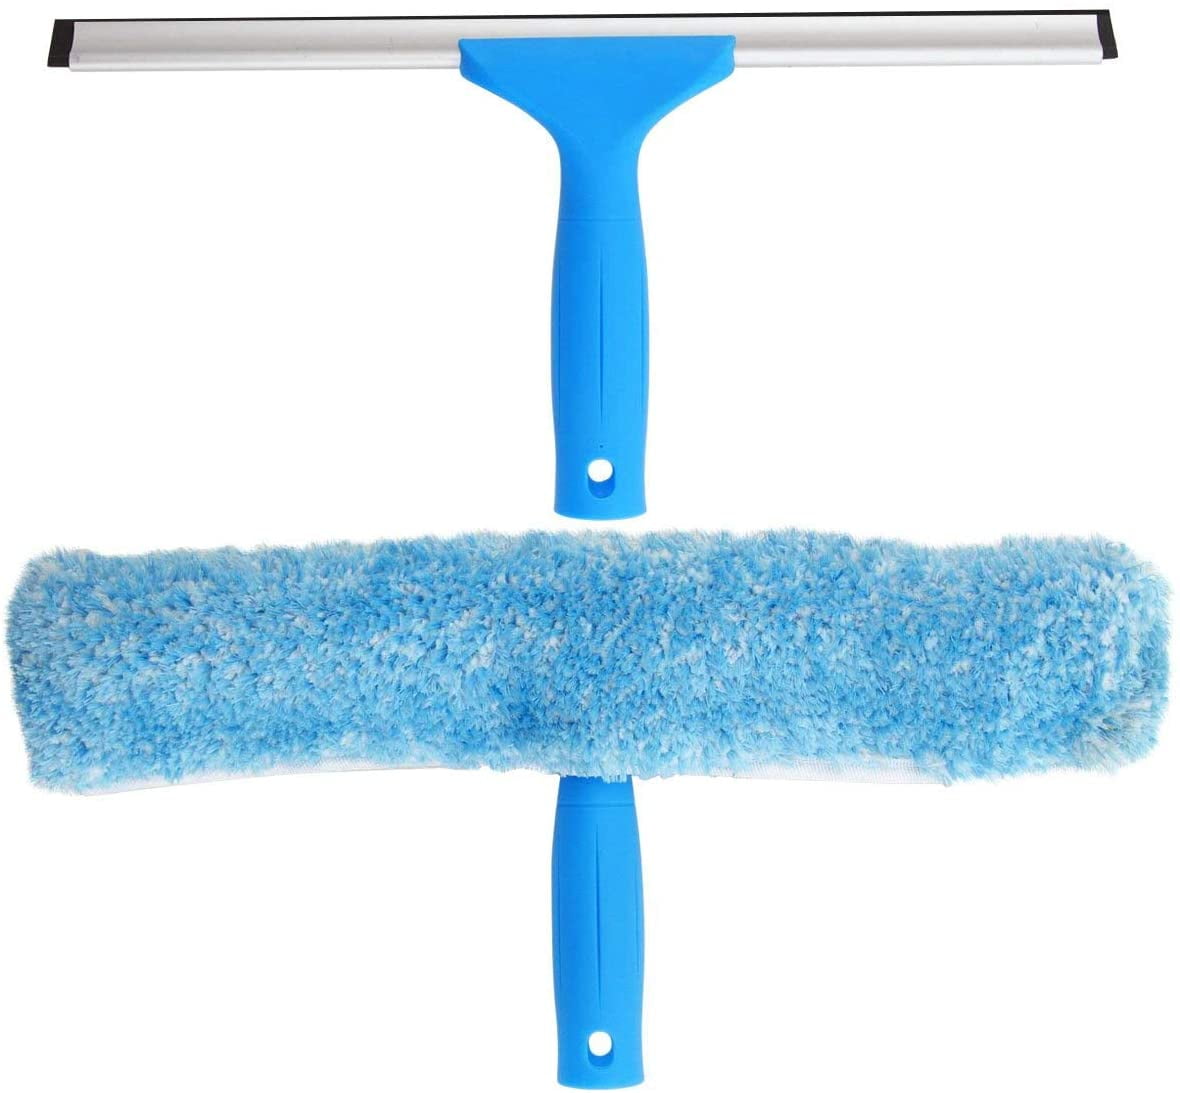 XMMSWDLA 2 in 1 Window Screen Cleaner Brush with Handle, Magic Window  Cleaning Brush, Also Suitable for Window Washer Squeegee Kit, Window  Cleaner